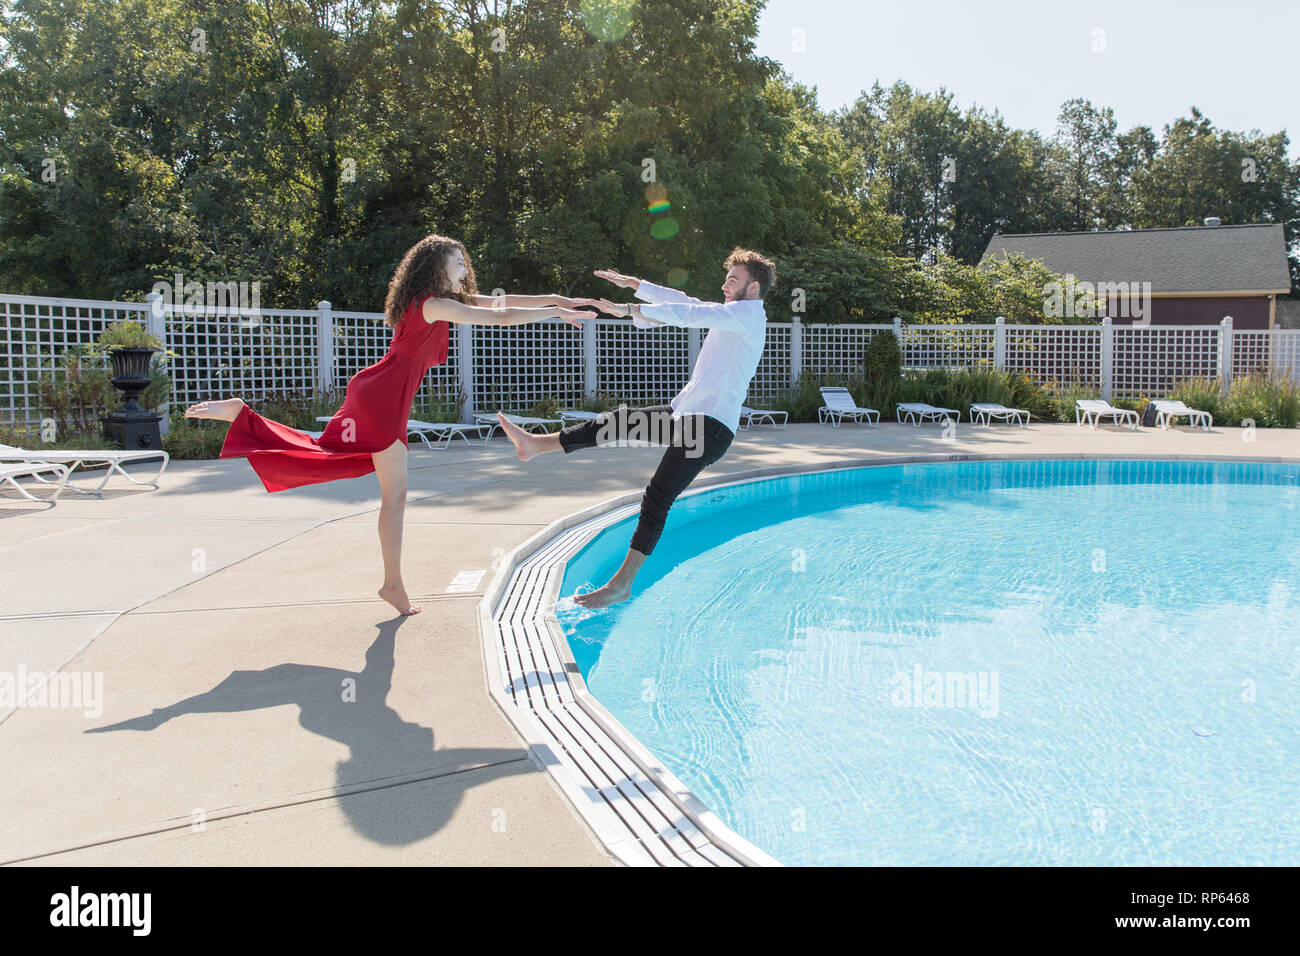 A young couple goofing around by a pool Stock Photo